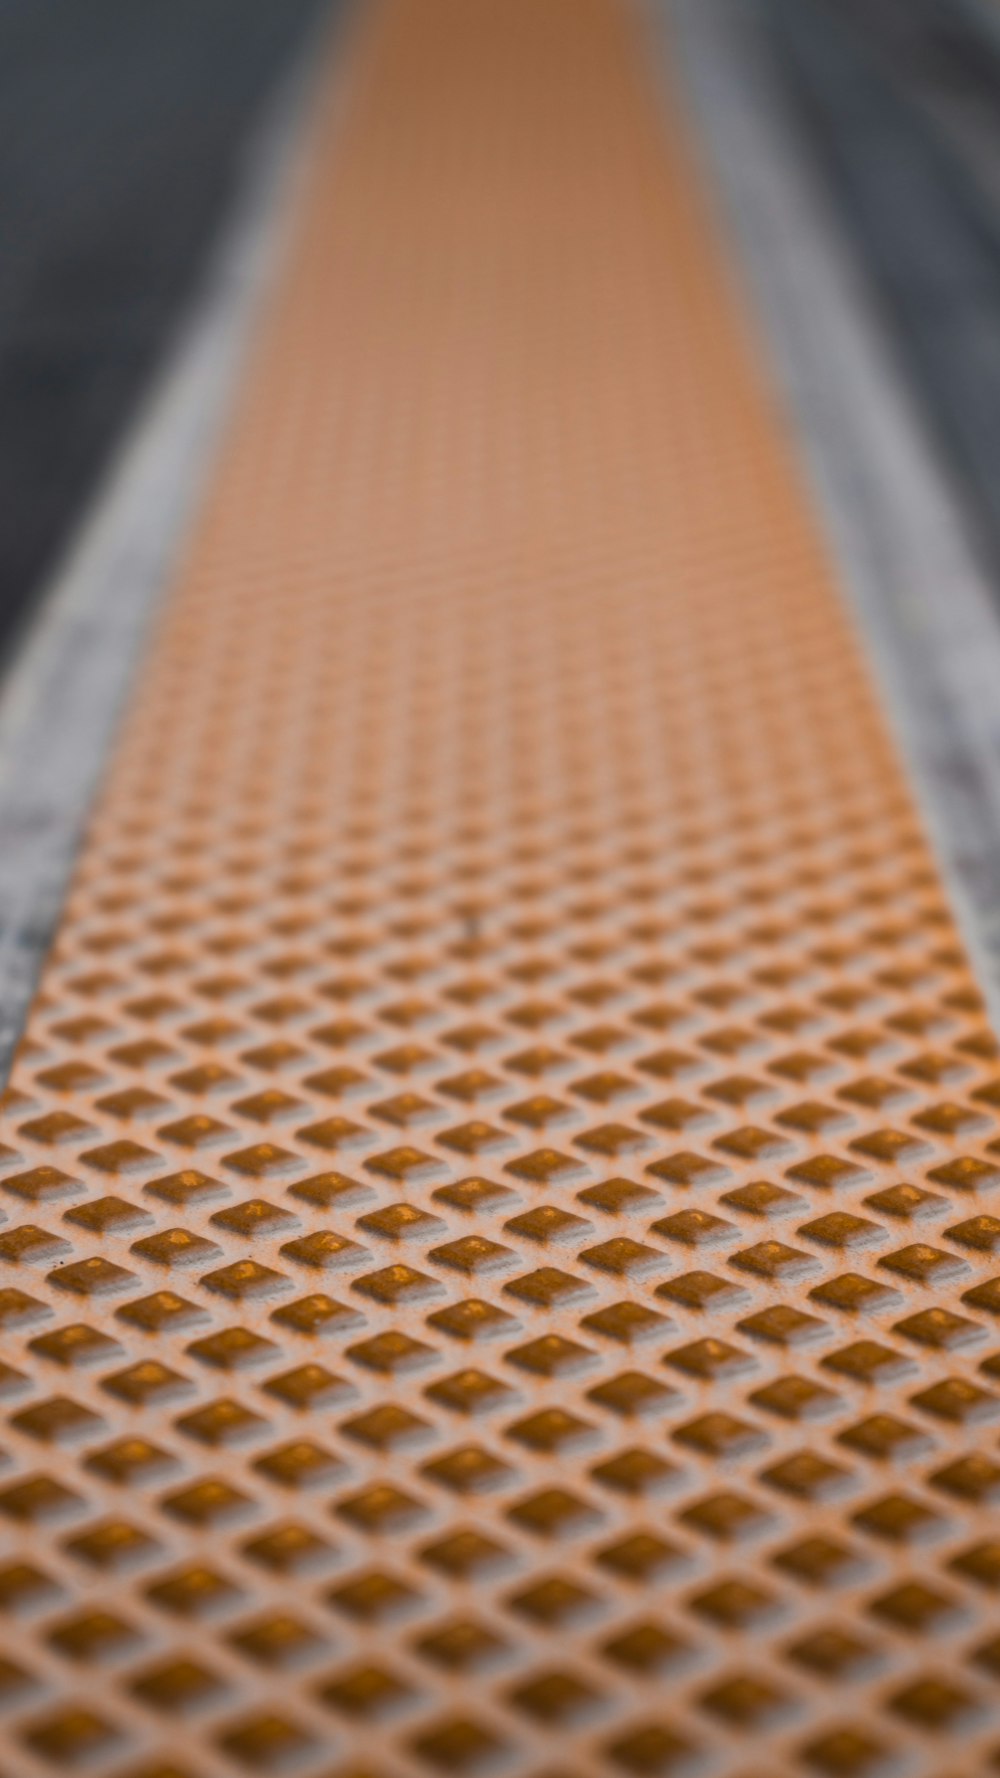 a close up view of a metal grate